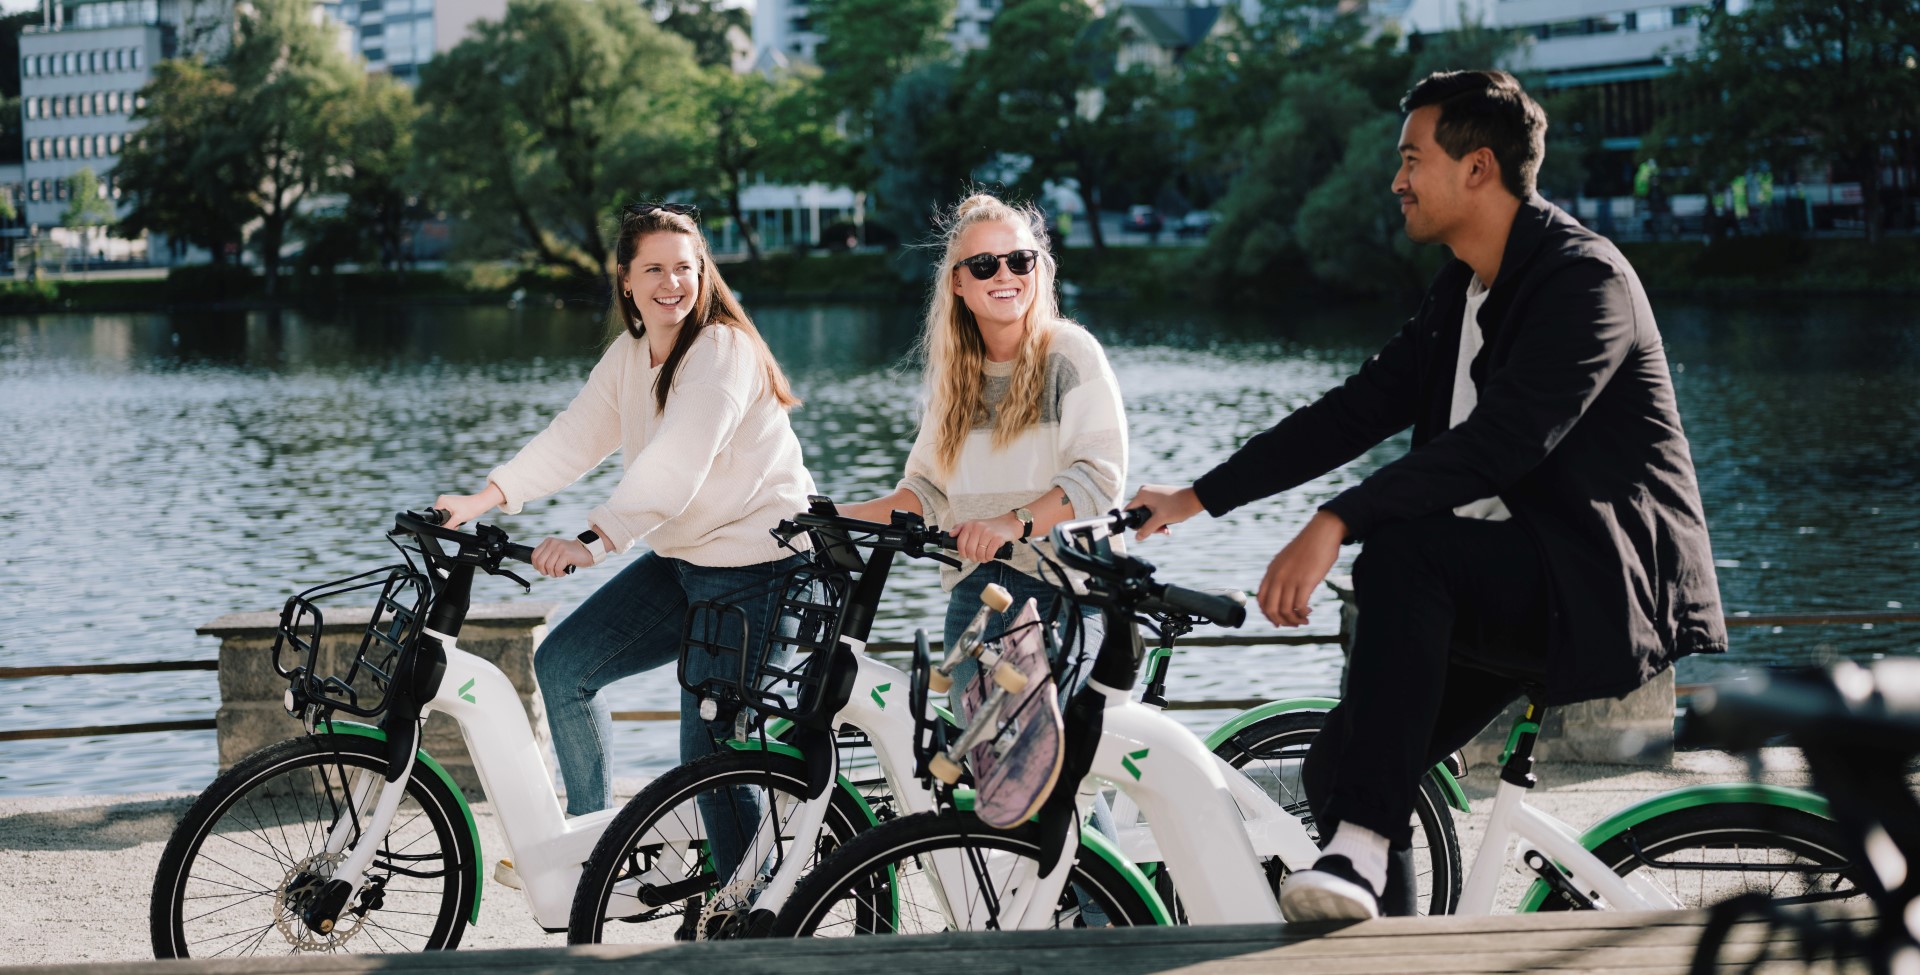 [NEWS] New electric city bikes in Rogaland, Norway